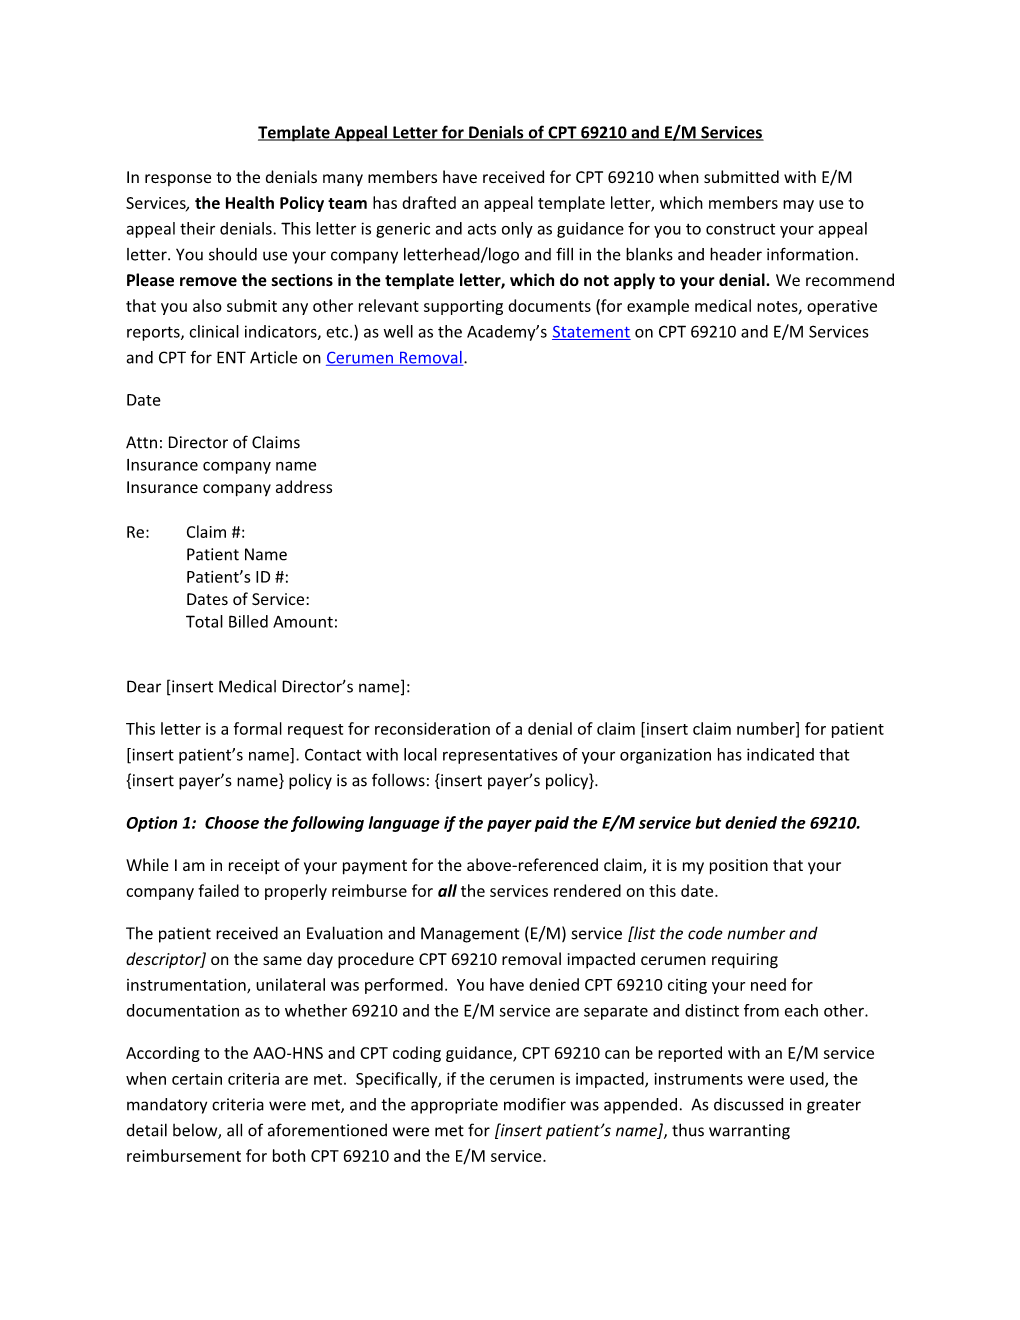 Template Appeal Letter for Denials of CPT 69210 and E/M Services